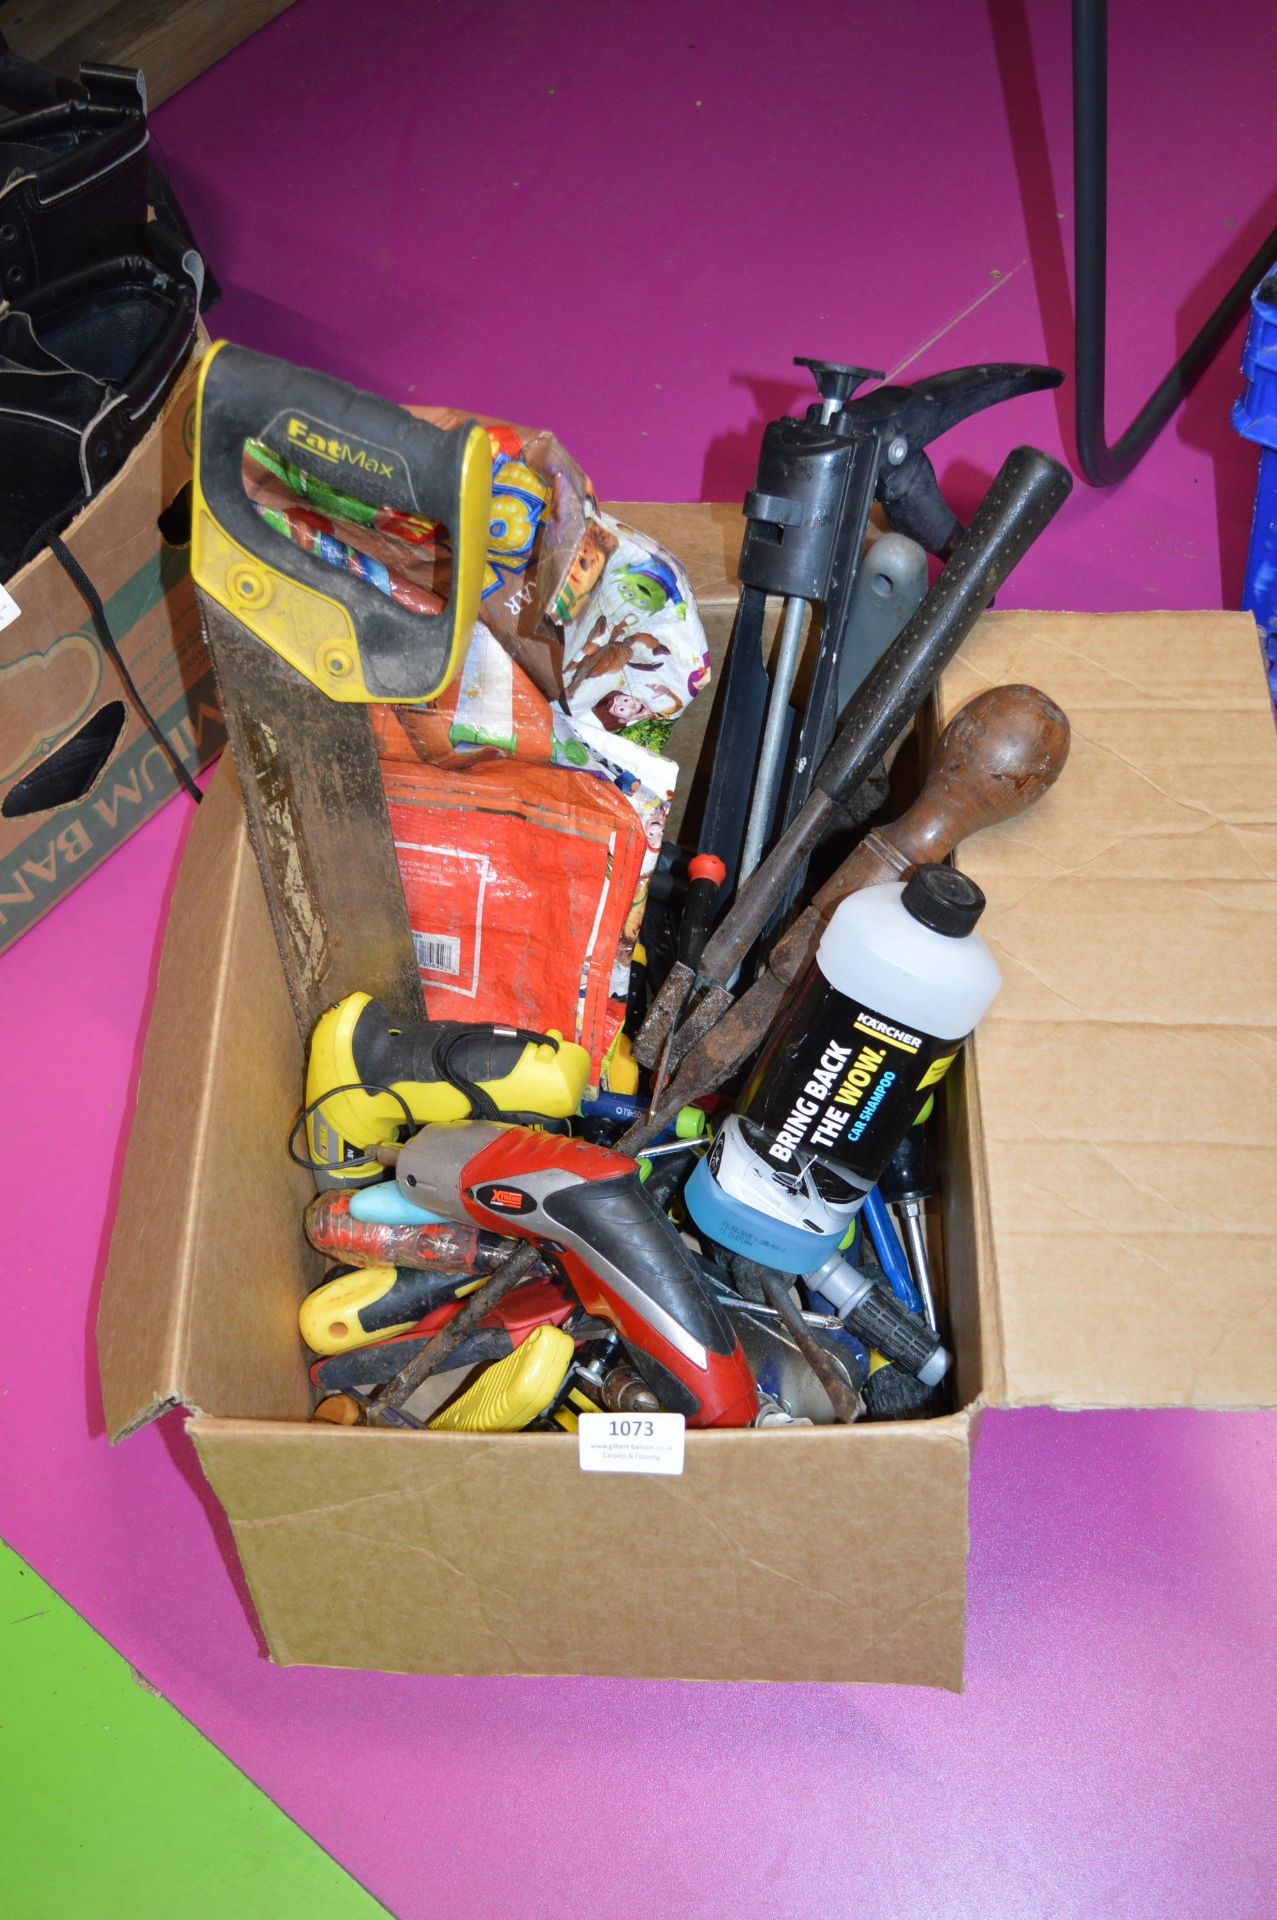 Box of Assorted Tools Including Drills, Screwdrivers, Saws, etc.